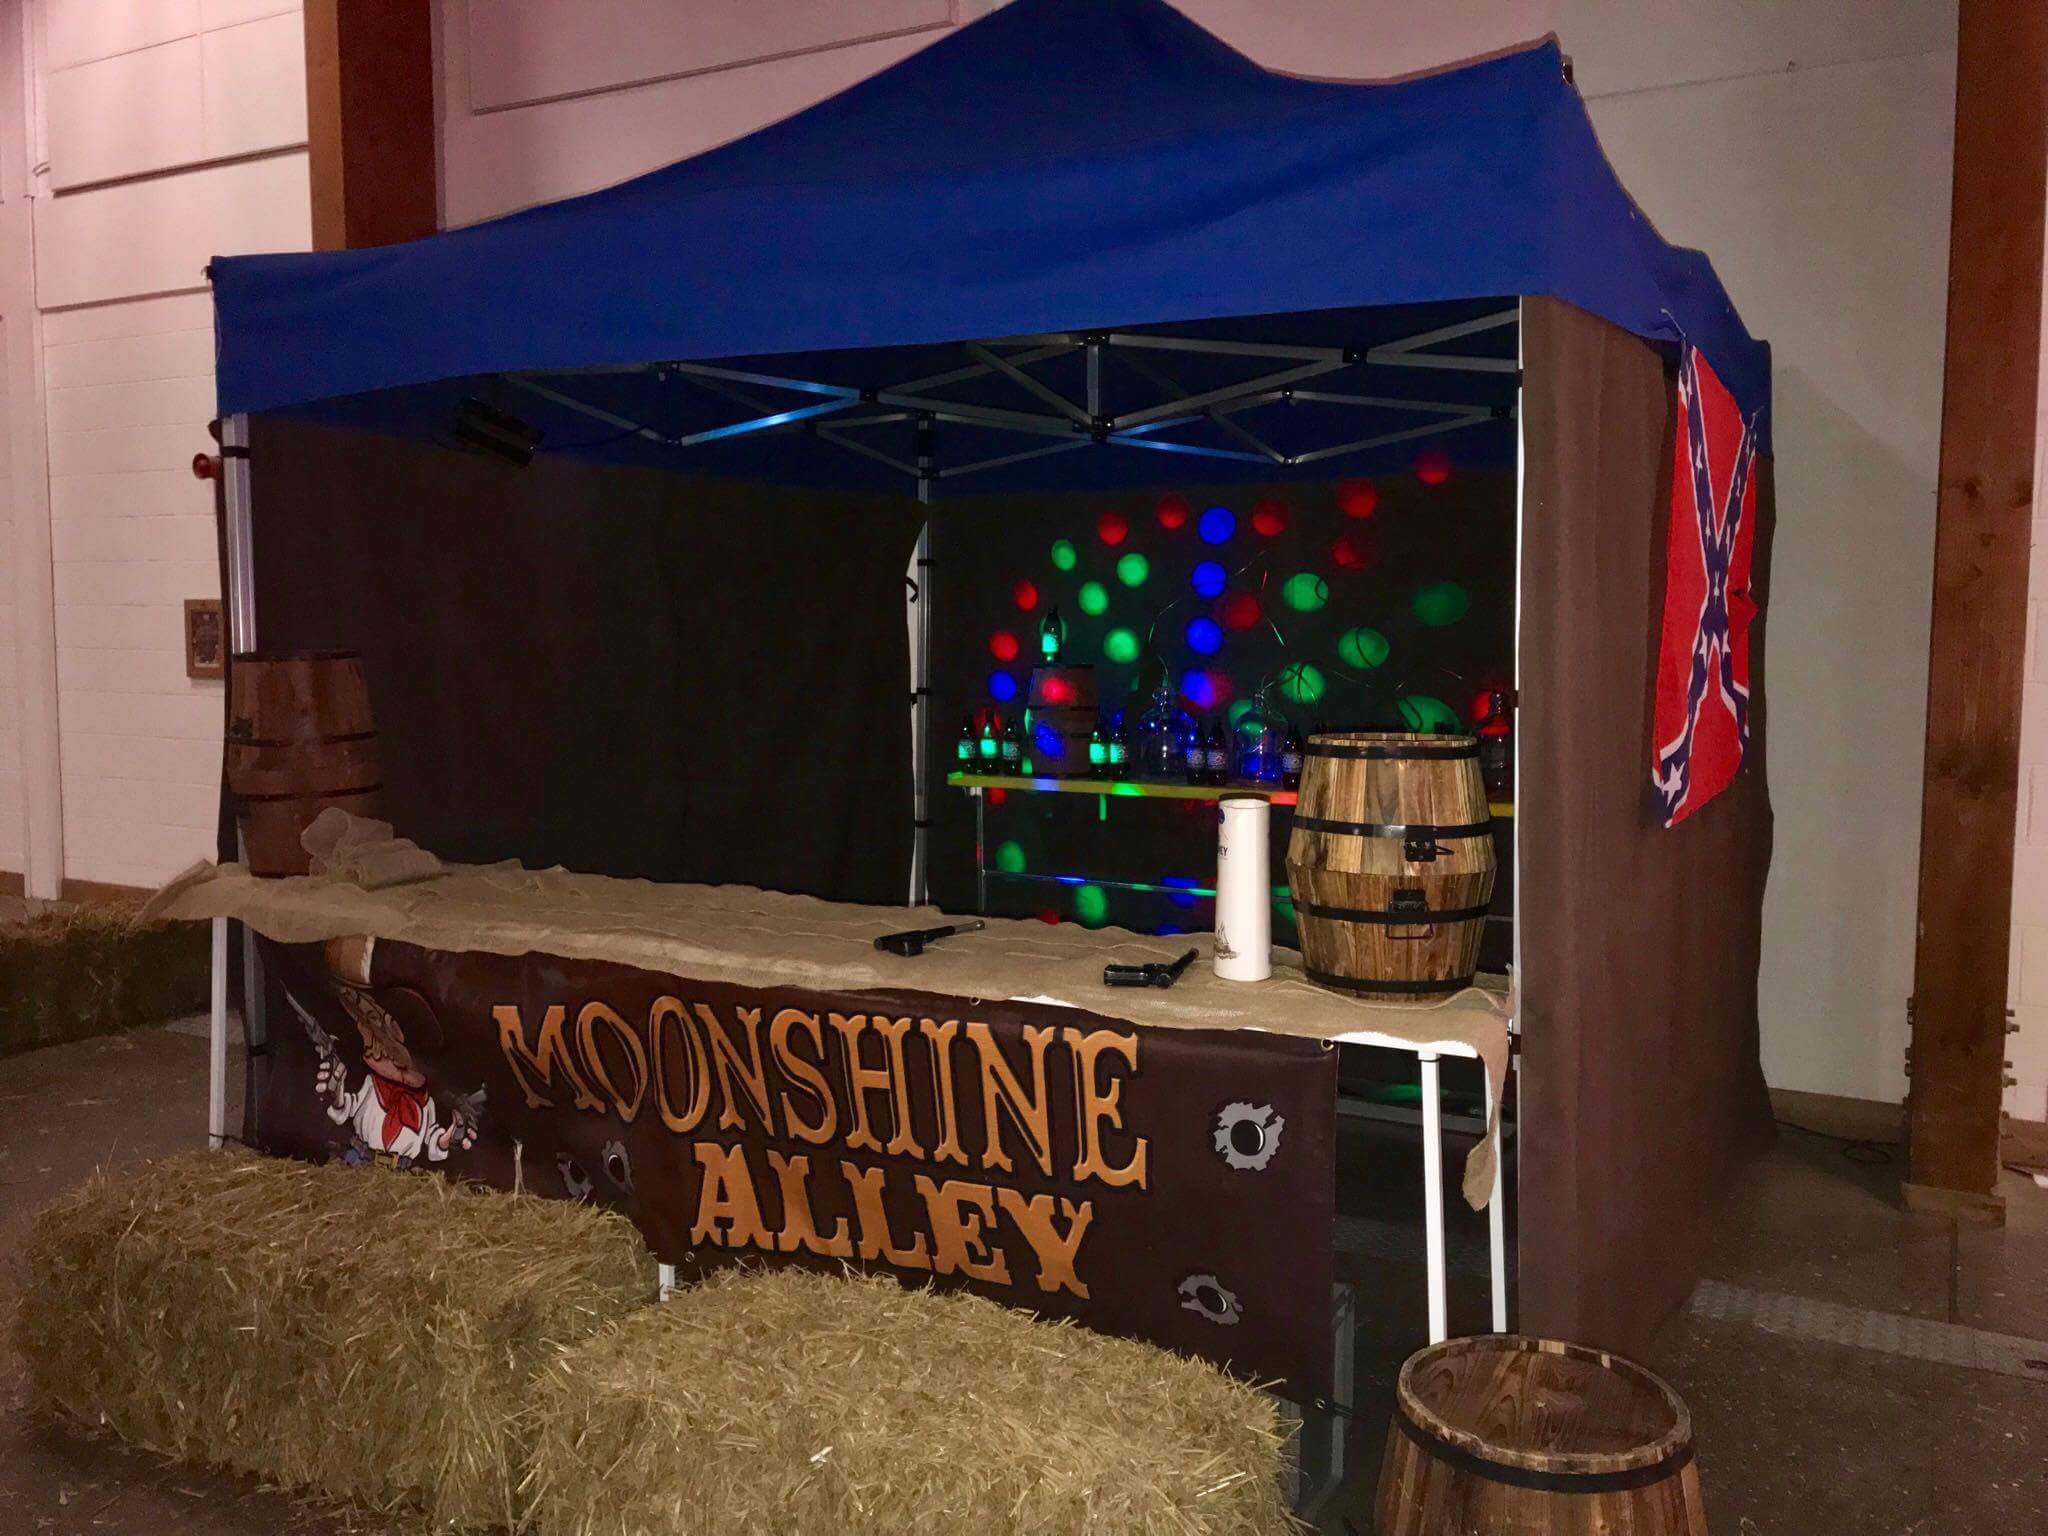 Main image for Moonshine Alley